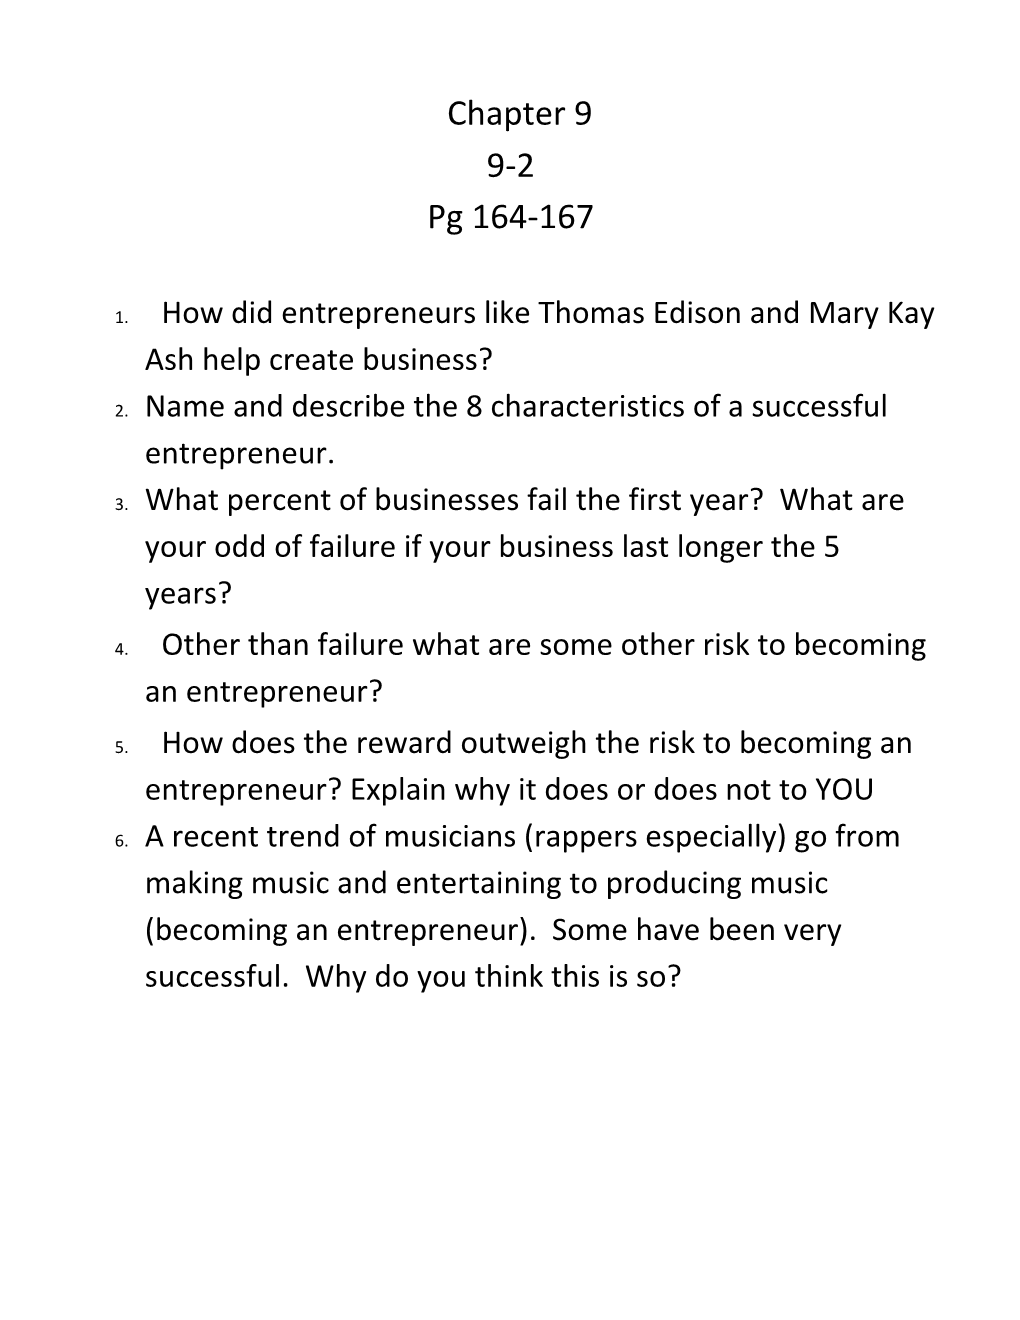 2. Name and Describe the 8 Characteristics of a Successful Entrepreneur